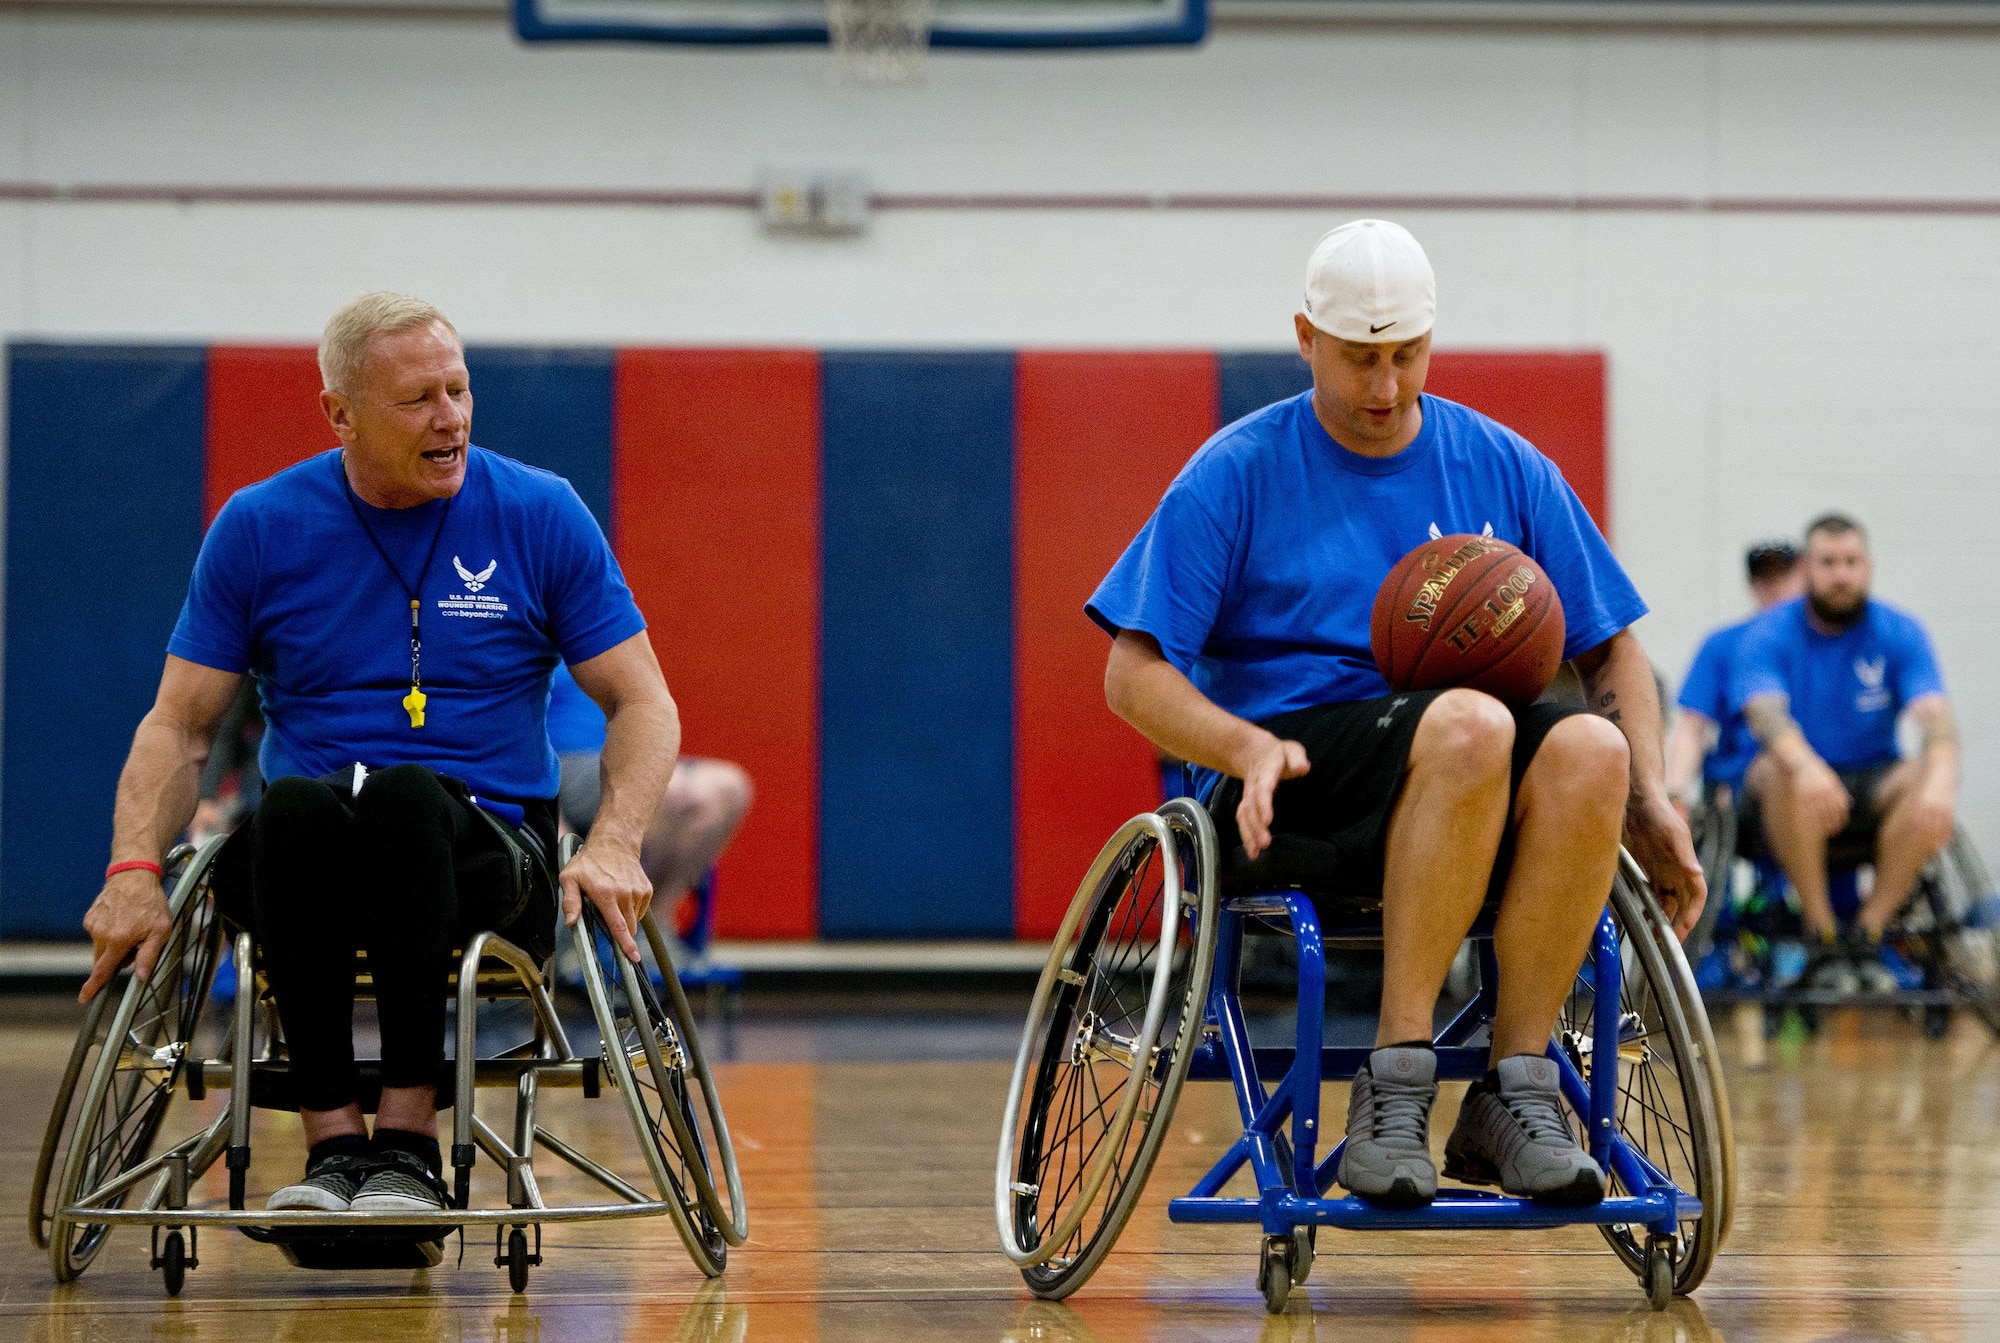 Senior Airman Chris Fugitt, a retired 96th Aircraft Maintenance Squadron Airman and an Air Force wounded warrior athlete, receives pointers on maneuvering a basketball with both hands from Mark Shepherd, an Air Force wounded warrior coach, at a wheelchair basketball session during an introductory adaptive sports and rehabilitation camp at Eglin Air Force Base, Fla., April 13, 2015. Two years after complications from a massive stroke forced Fugitt to retire from the Air Force, his warrior spirit enabled him to power past a number of debilitating setbacks and attend his first camp. (U.S. Air Force photo/Samuel King Jr.)